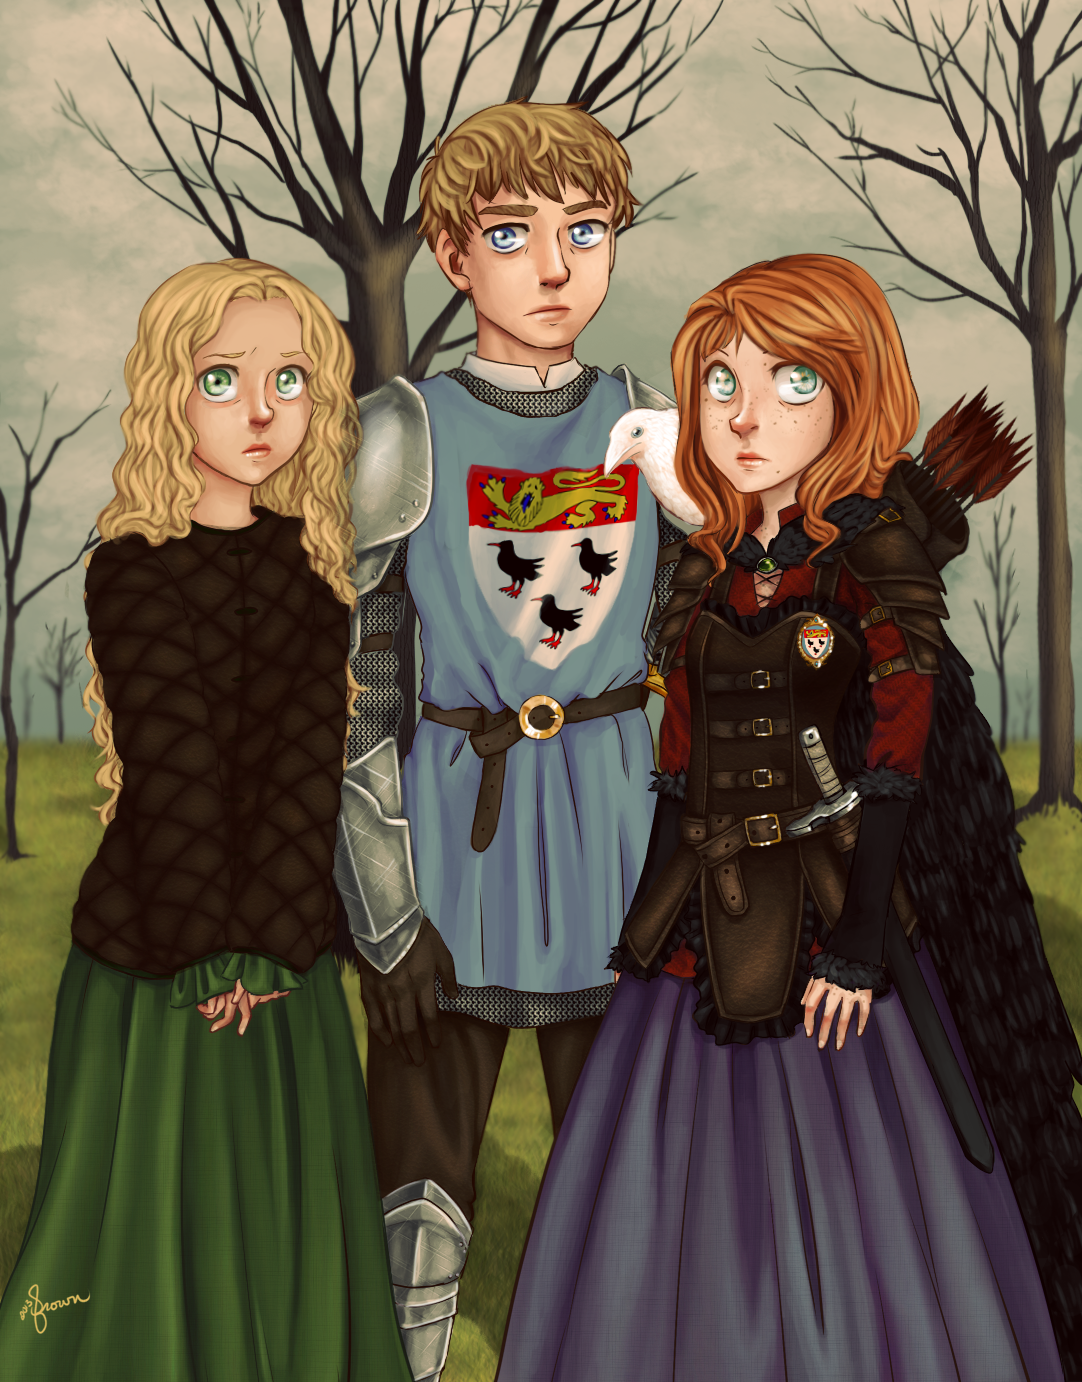 evelyn__mercury__evrain__and_april_by_madratbird-d5tddcm.png